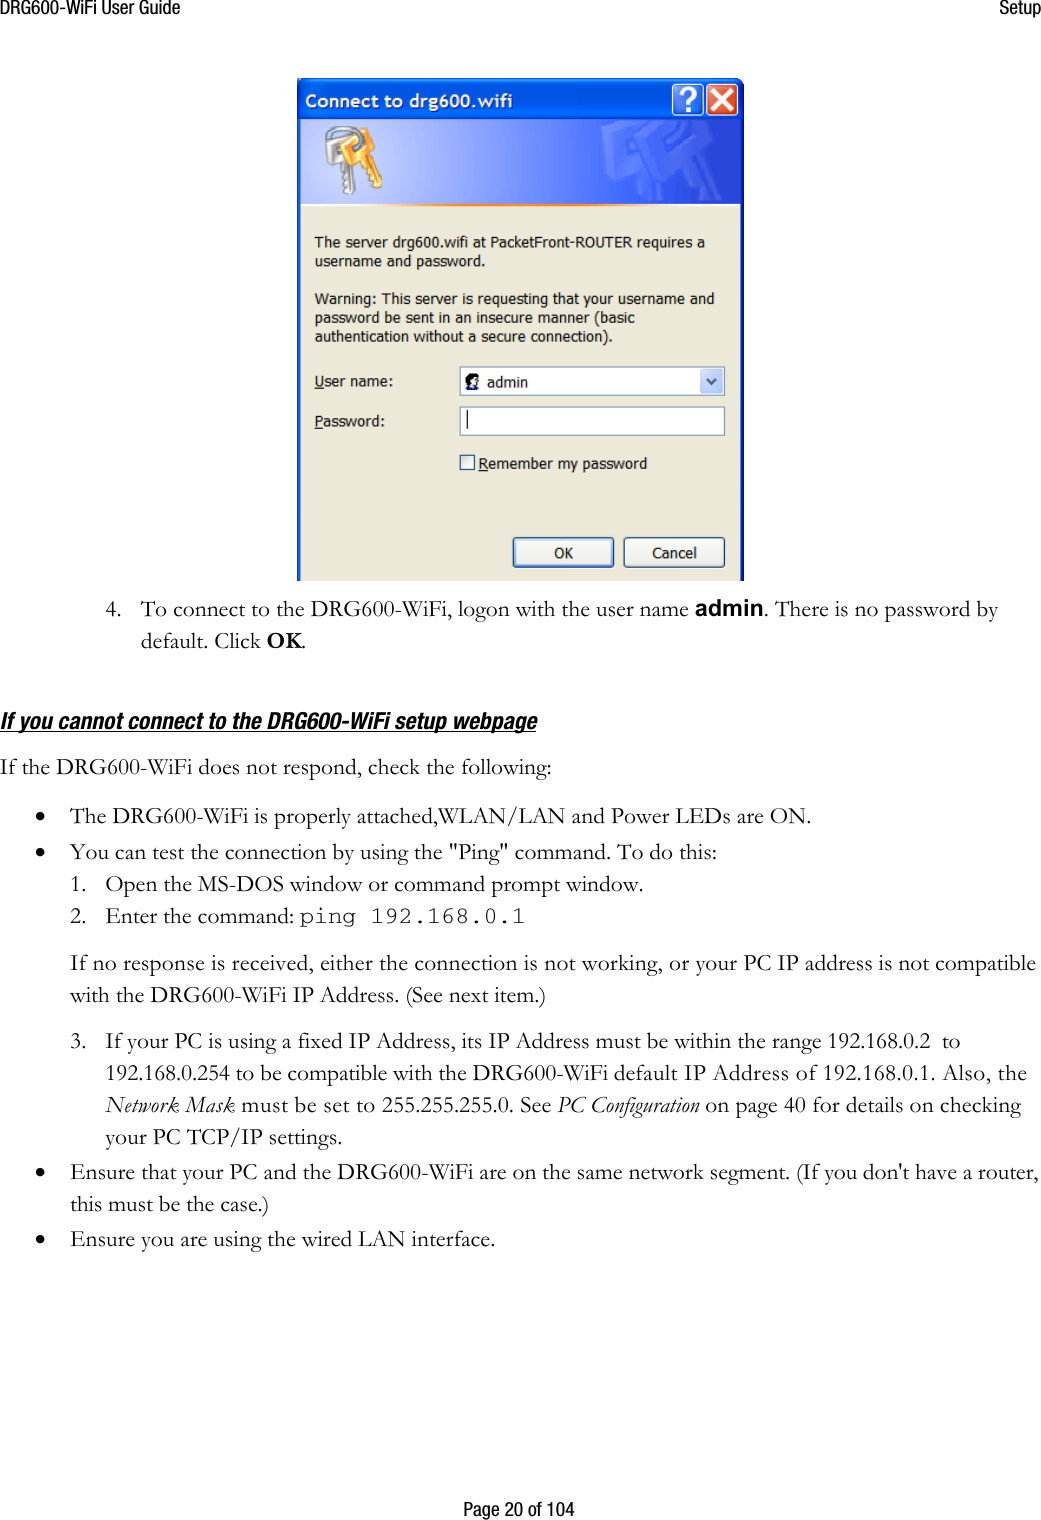 DRG600WiFi User Guide  Setup  Page 20 of 104  4. To connect to the DRG600-WiFi, logon with the user name admin. There is no password by default. Click OK.  If you cannot connect to the DRG600WiFi setup webpage If the DRG600-WiFi does not respond, check the following: • The DRG600-WiFi is properly attached,WLAN/LAN and Power LEDs are ON.  • You can test the connection by using the &quot;Ping&quot; command. To do this: 1. Open the MS-DOS window or command prompt window. 2. Enter the command: ping 192.168.0.1 If no response is received, either the connection is not working, or your PC IP address is not compatible with the DRG600-WiFi IP Address. (See next item.) 3. If your PC is using a fixed IP Address, its IP Address must be within the range 192.168.0.2  to 192.168.0.254 to be compatible with the DRG600-WiFi default IP Address of 192.168.0.1. Also, the Network Mask must be set to 255.255.255.0. See PC Configuration on page 40 for details on checking your PC TCP/IP settings. • Ensure that your PC and the DRG600-WiFi are on the same network segment. (If you don&apos;t have a router, this must be the case.) • Ensure you are using the wired LAN interface.    